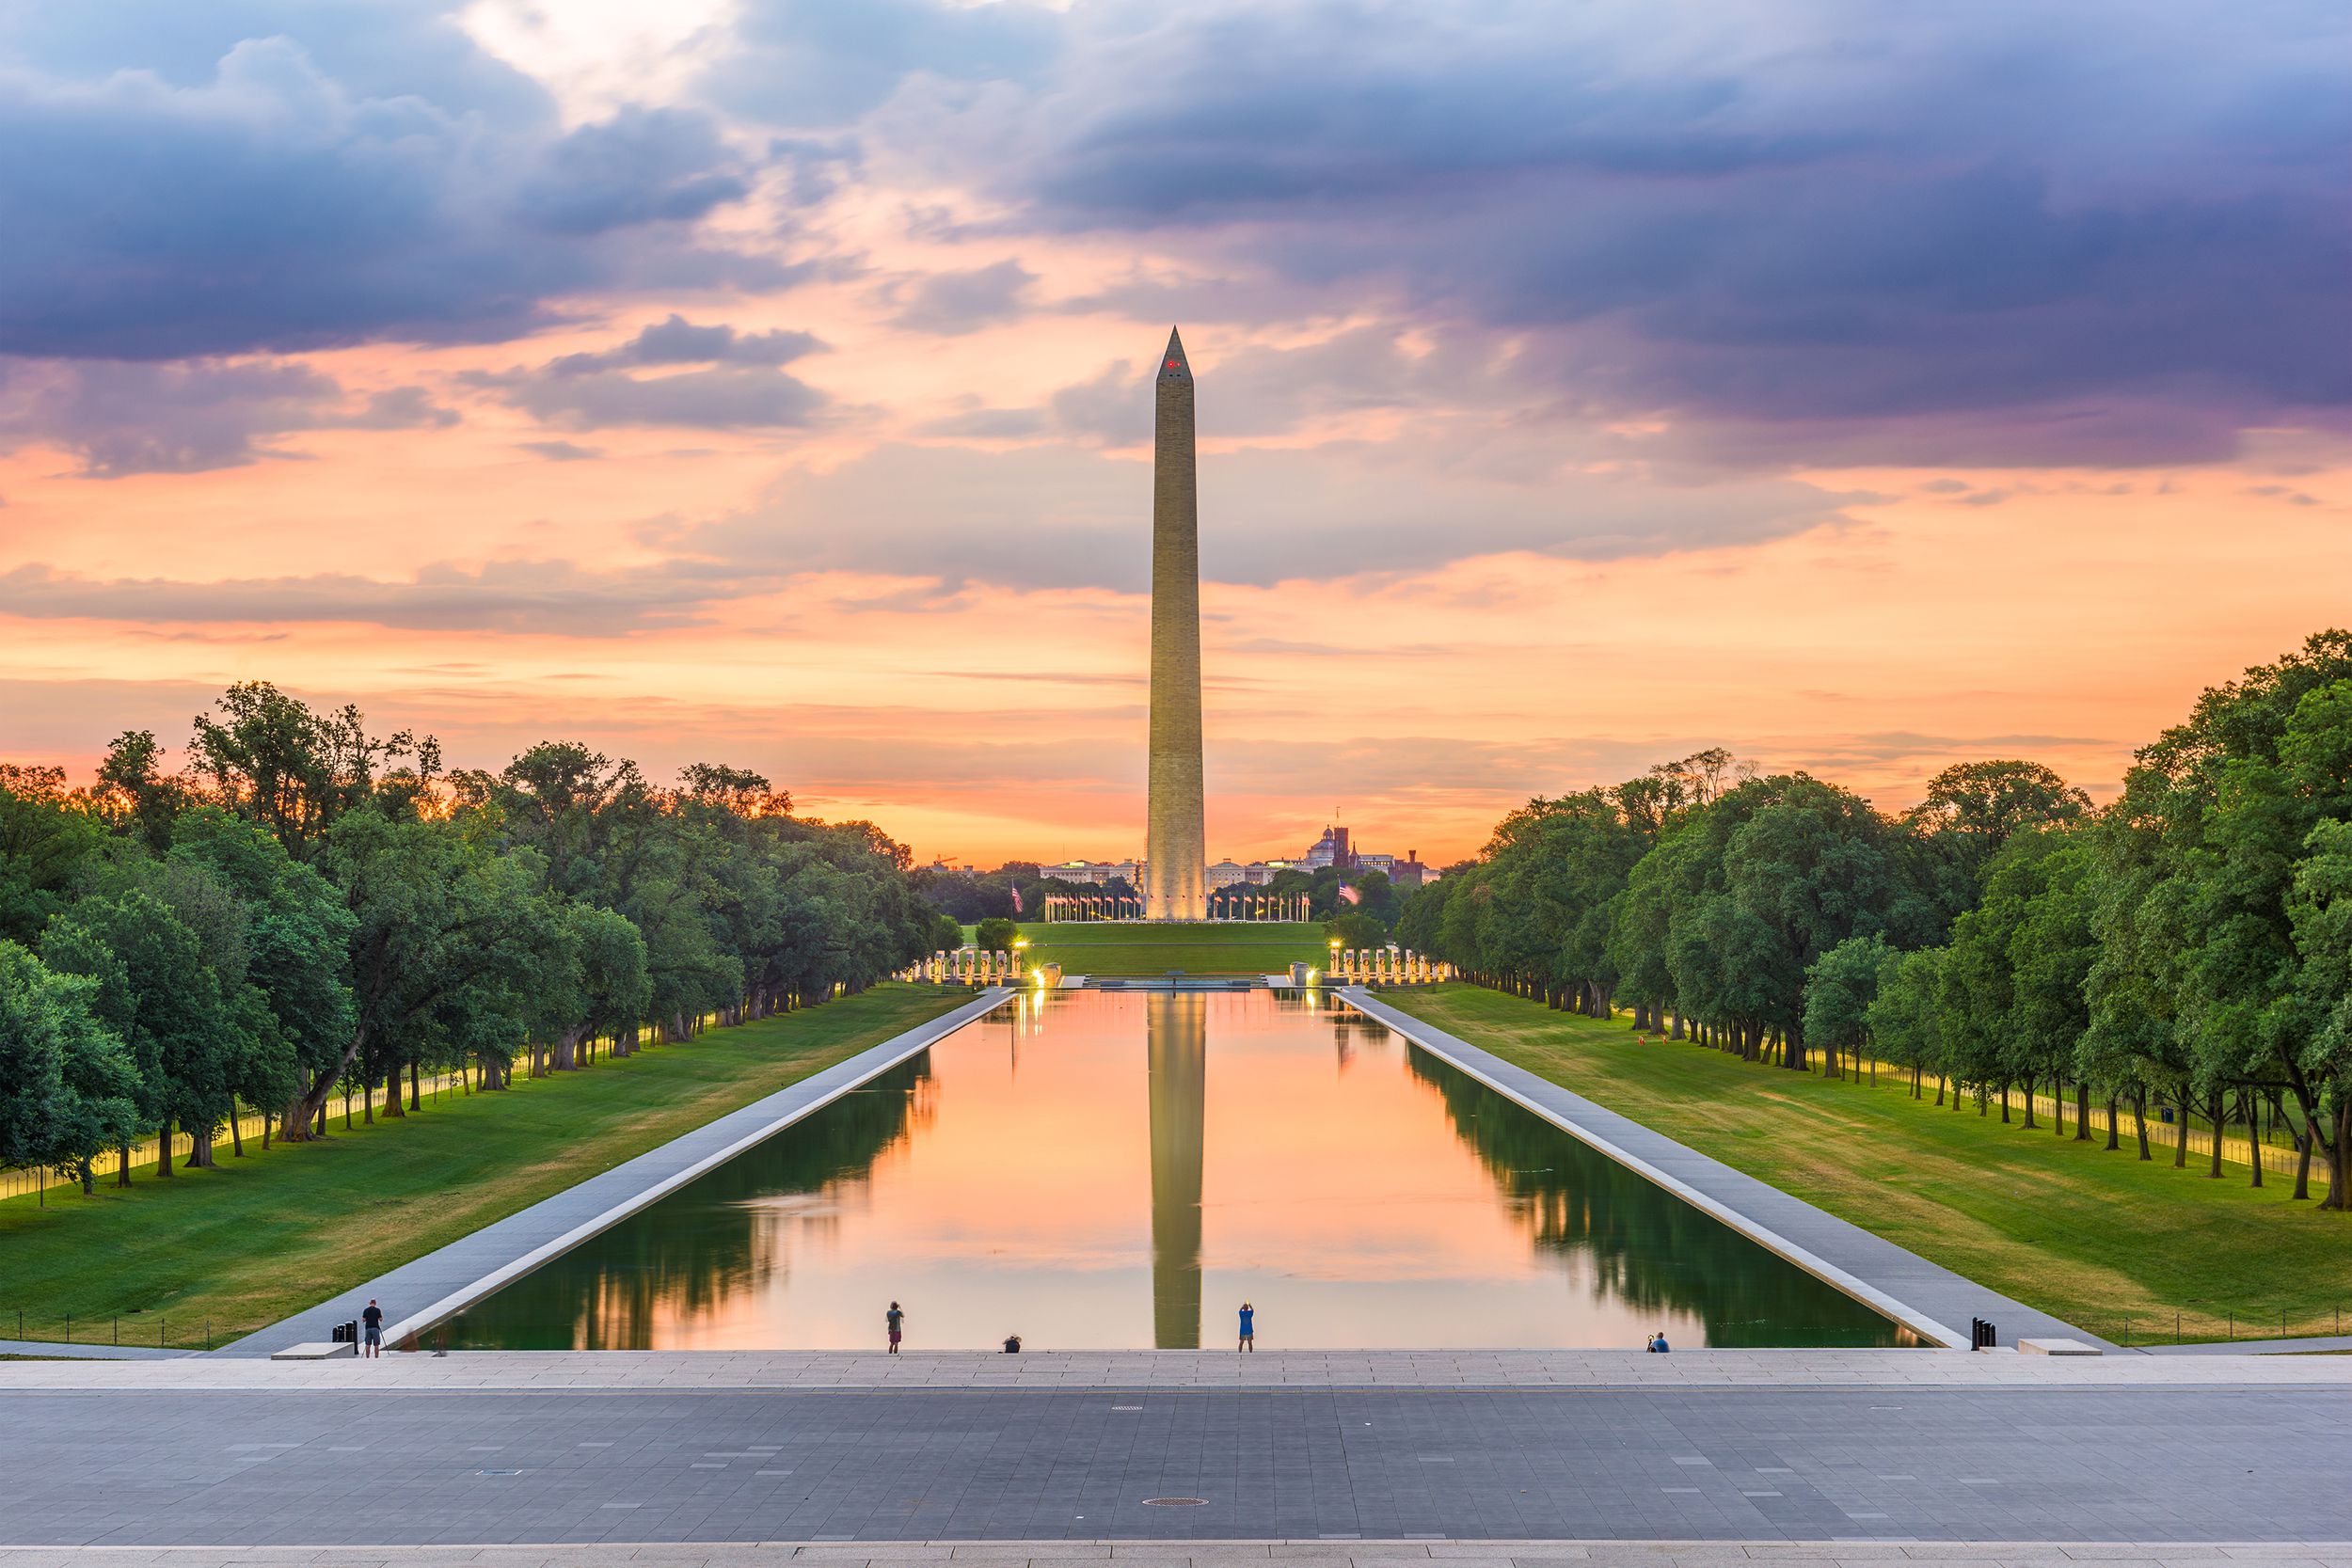 <p><em>Washington, D.C.</em> <br>The 555-foot obelisk on the National Mall was built to commemorate George Washington, commander-in-chief of the Continental Army who would go on to be America's first president. The <a href="https://www.nps.gov/wamo/index.htm">Washington Monument</a> opened to the public in 1888, and has been a signature site in the nation's capital since. </p><p><b>Related:</b> <a href="https://blog.cheapism.com/free-things-to-do-in-washington-dc/">23 Free or Cheap Things to Do in Washington, D.C</a>.</p>